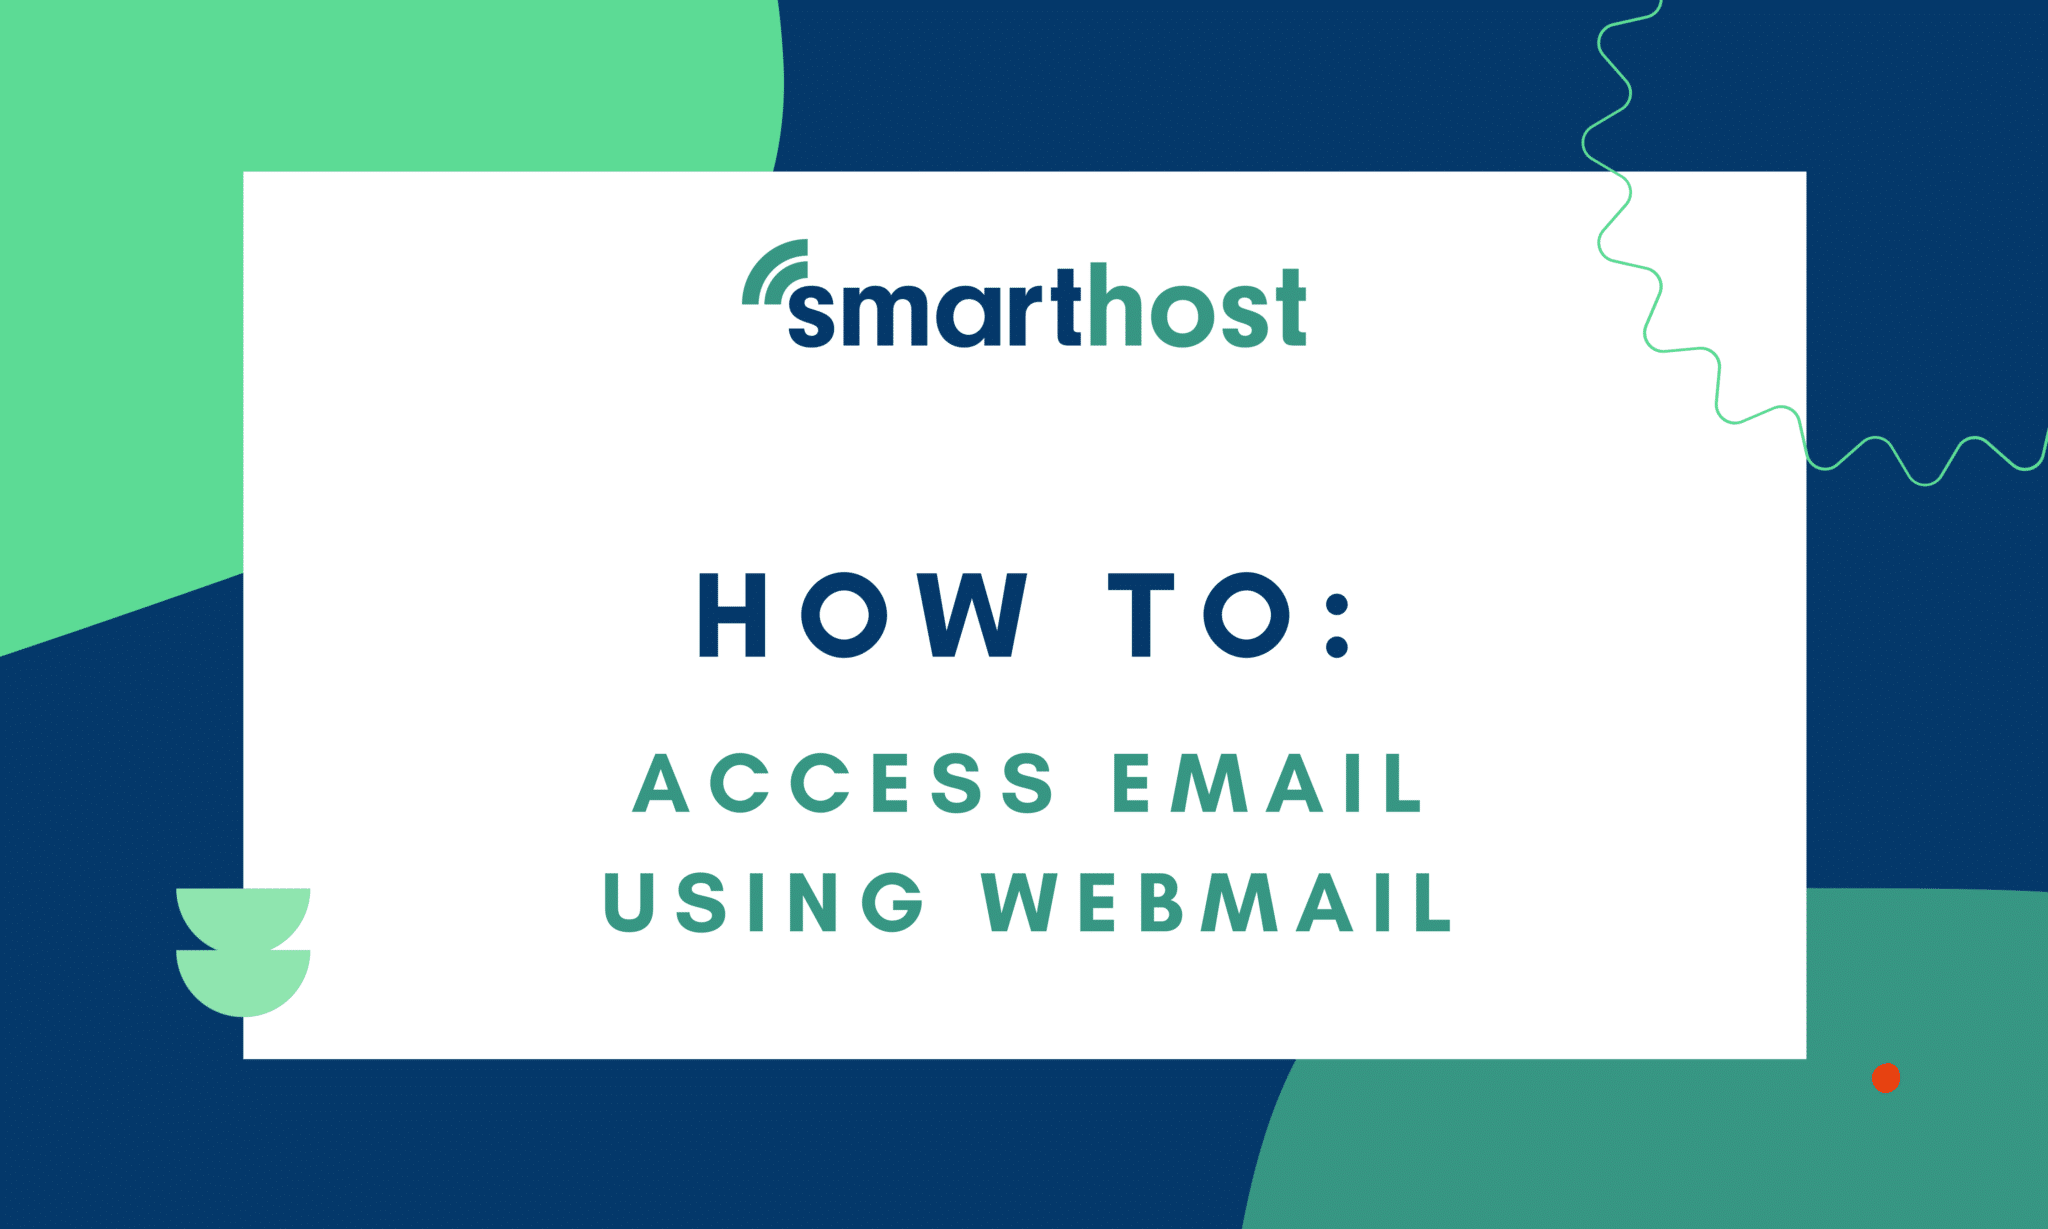 The image is showing instructions on how to access email using webmail.